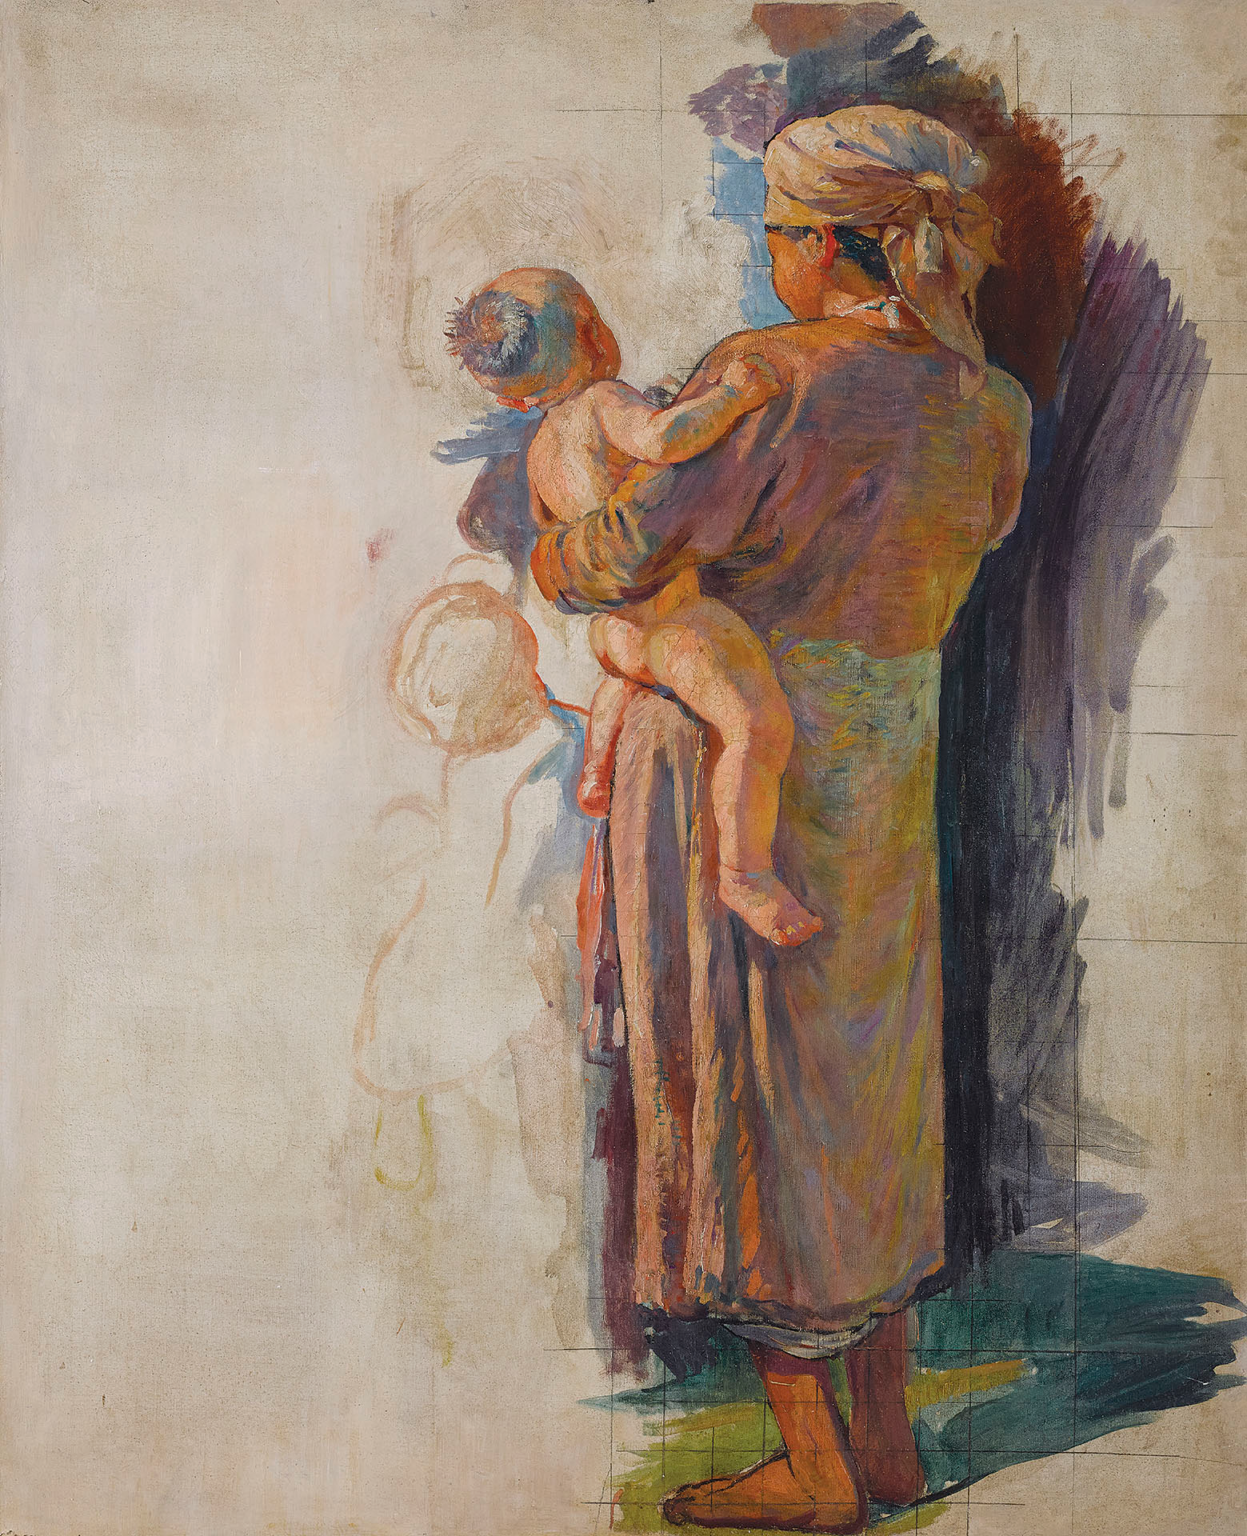 VICTOR TARDIEU (French, 1870-1937)
Vietnamienne à l’enfant (Vietnamese Mother and Child)
stamped with atelier stamp 'Victor Tardieu' (on canvas overlap and on the stretcher)
oil on canvas
120 x 98 cm. (47 1/4 x 38 5/8 in.)
Painted between 1922-1925